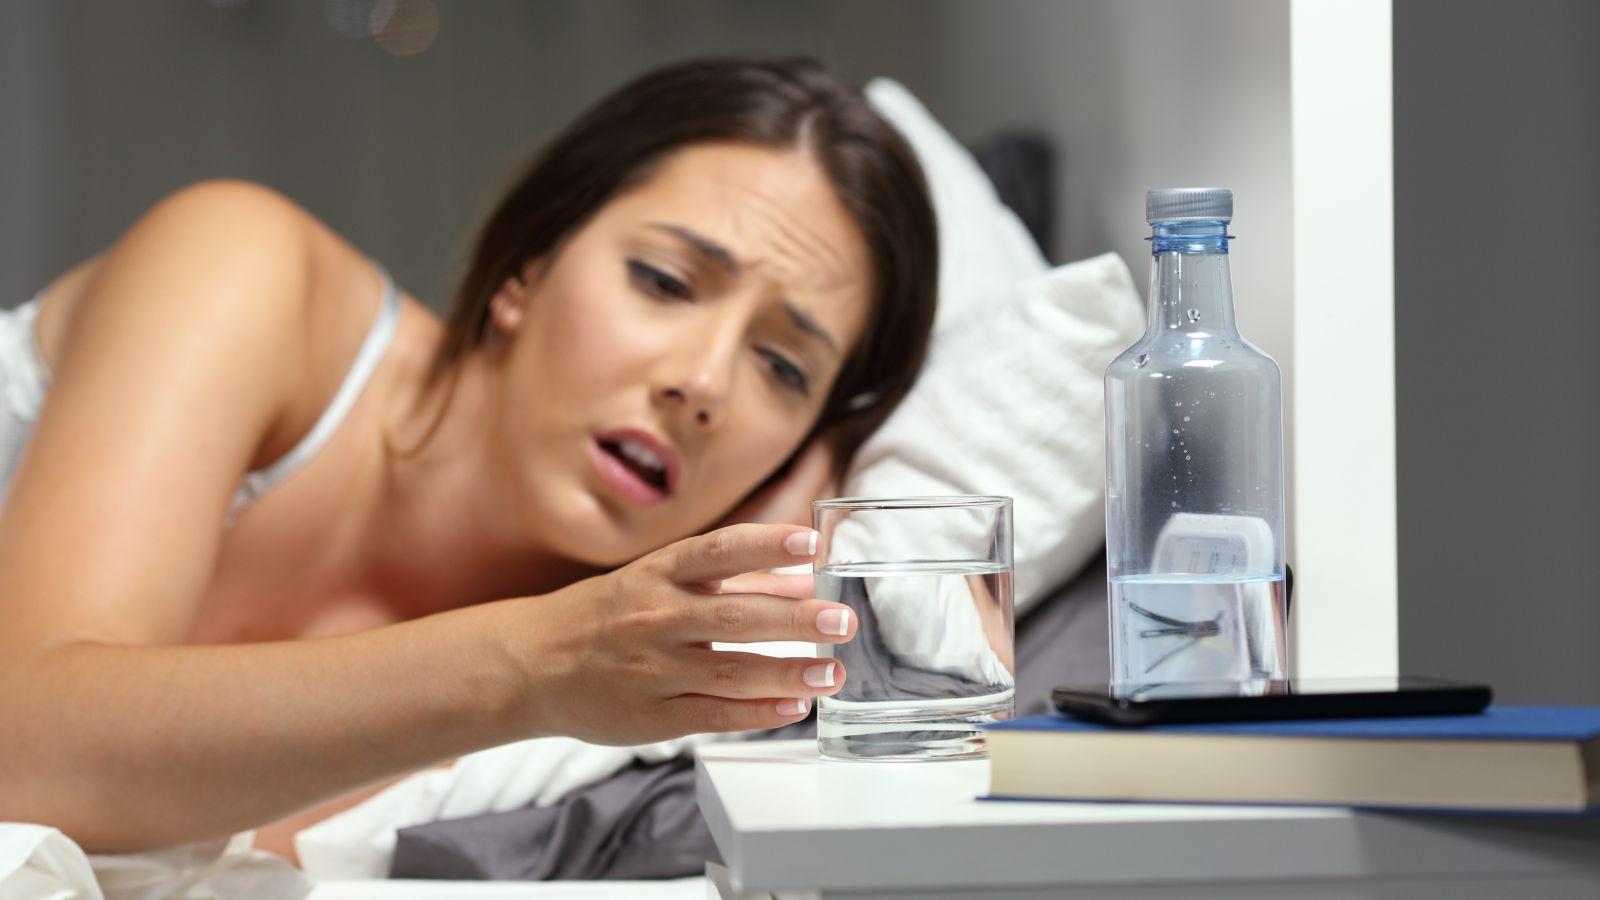 What causes headaches dehydration and lack of food